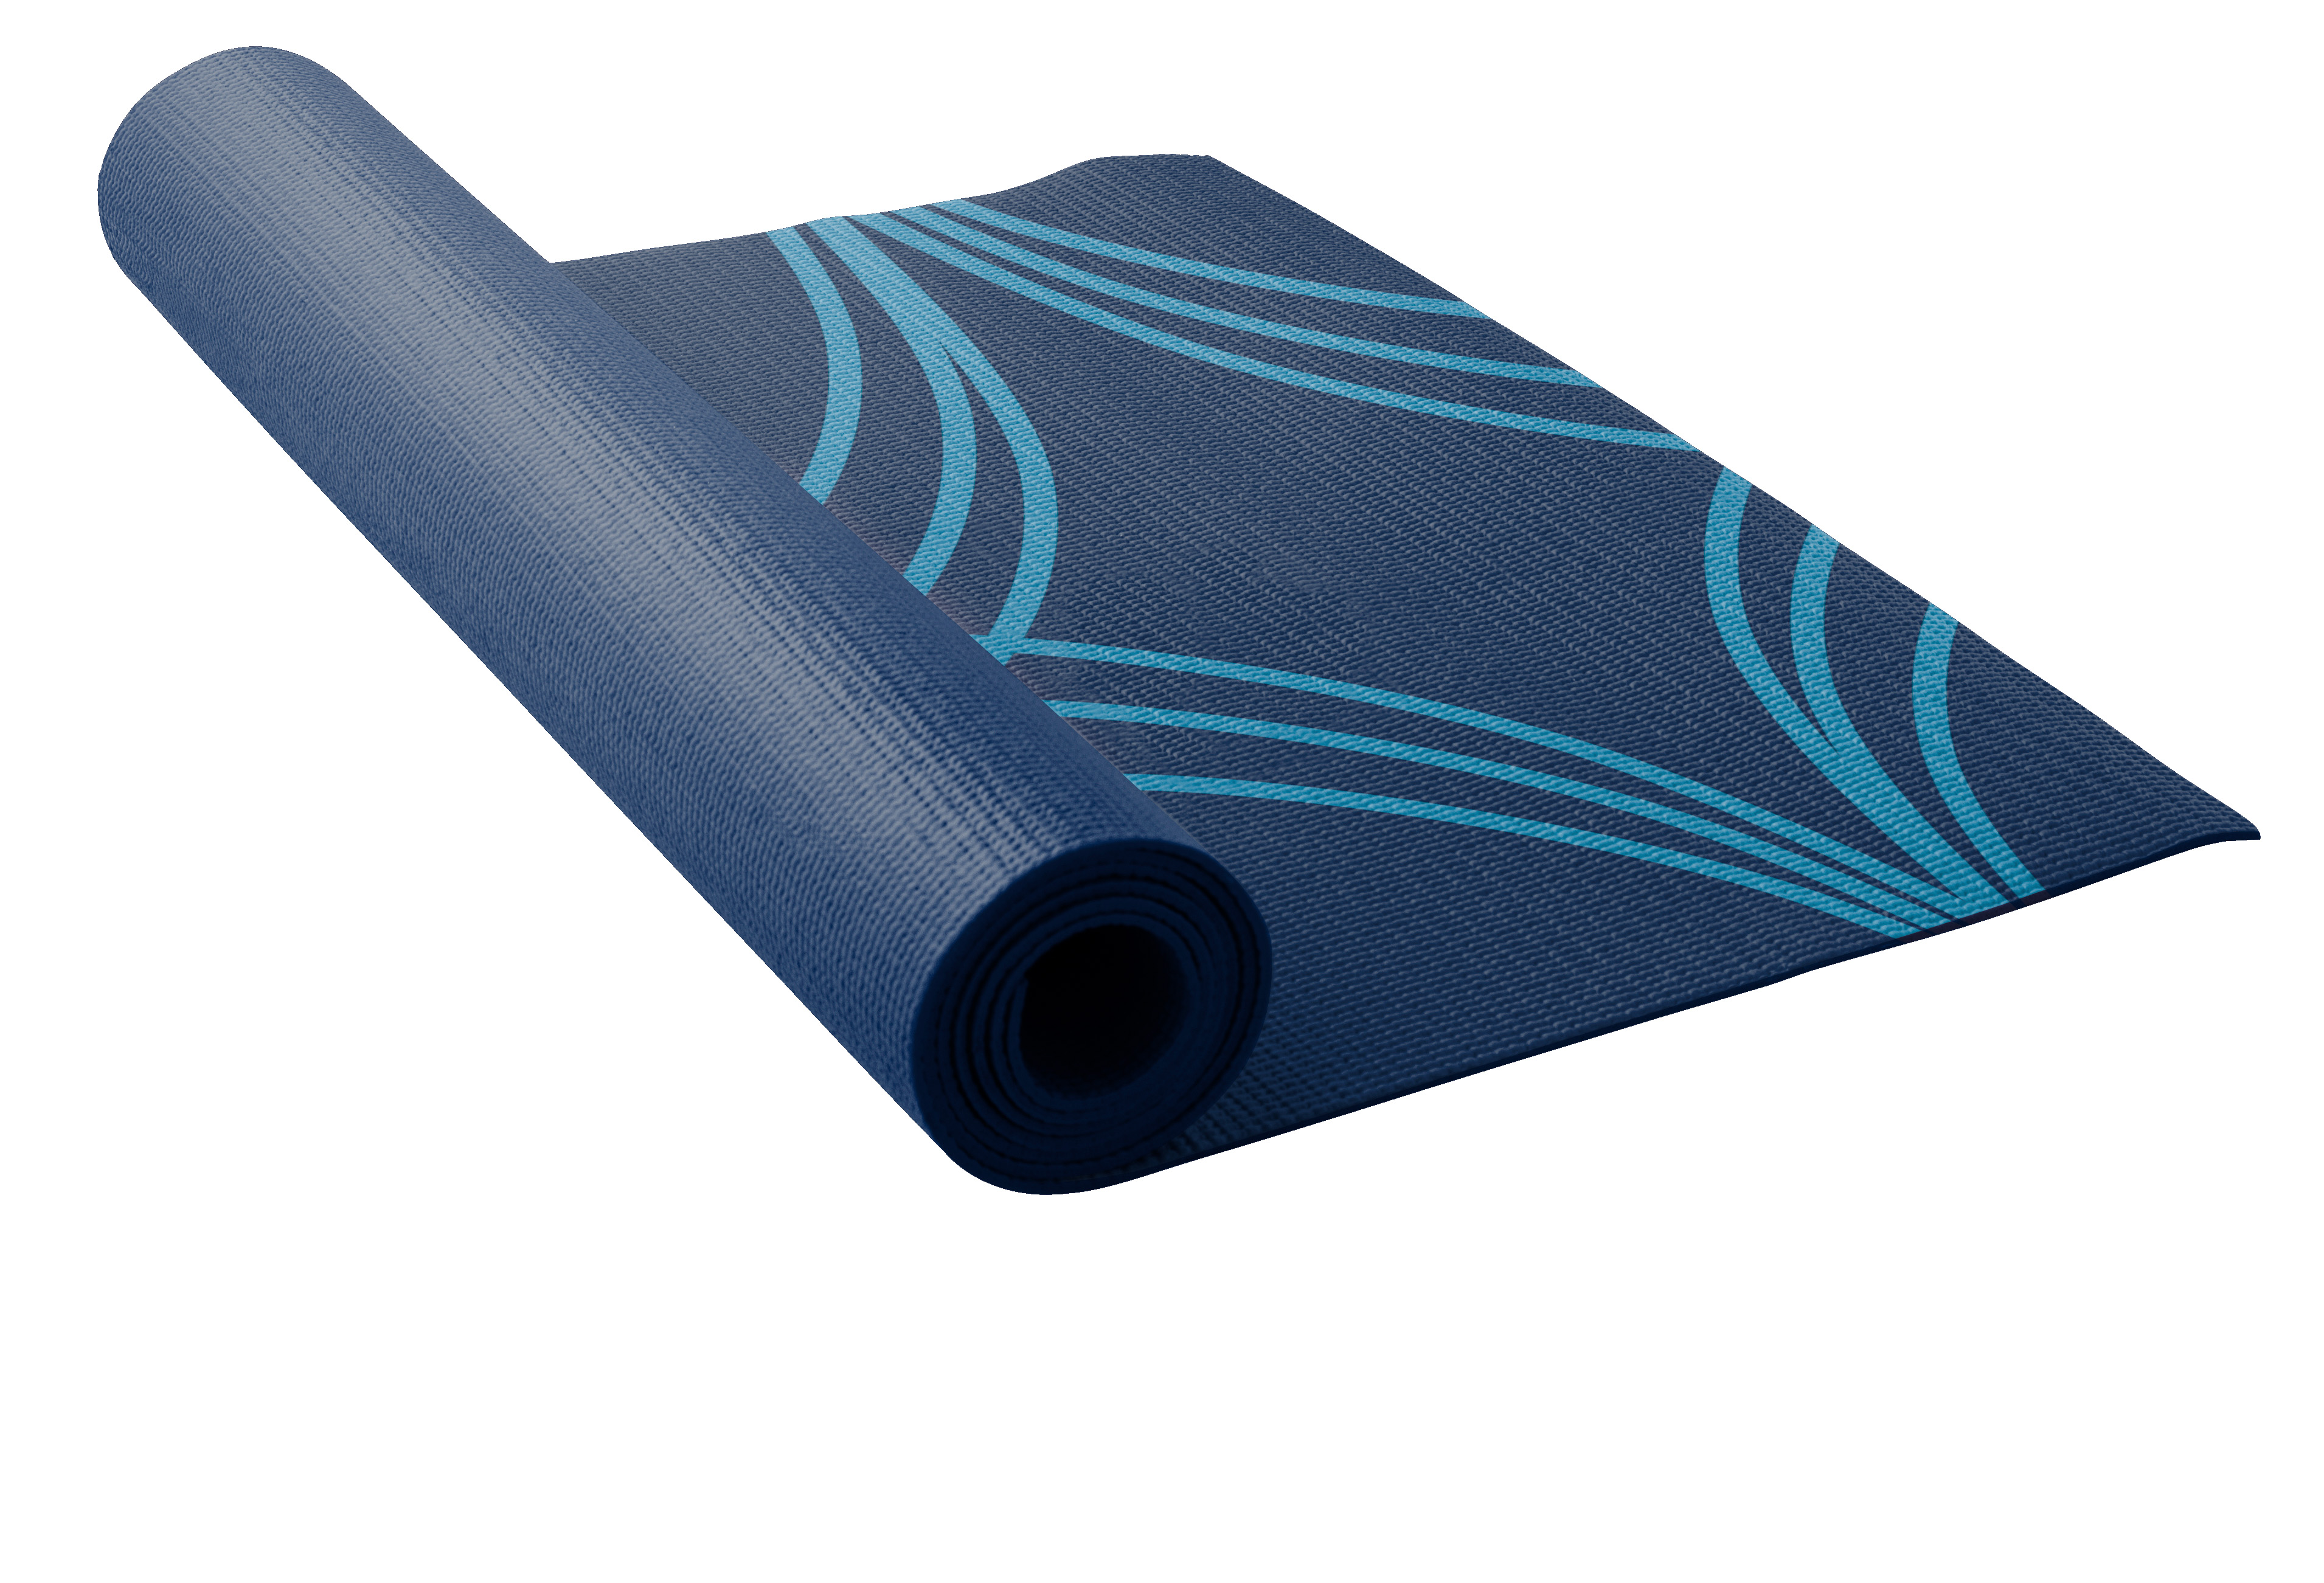 Lotus Printed Yoga Mat with Non-Slip Surface, 3mm - image 1 of 3